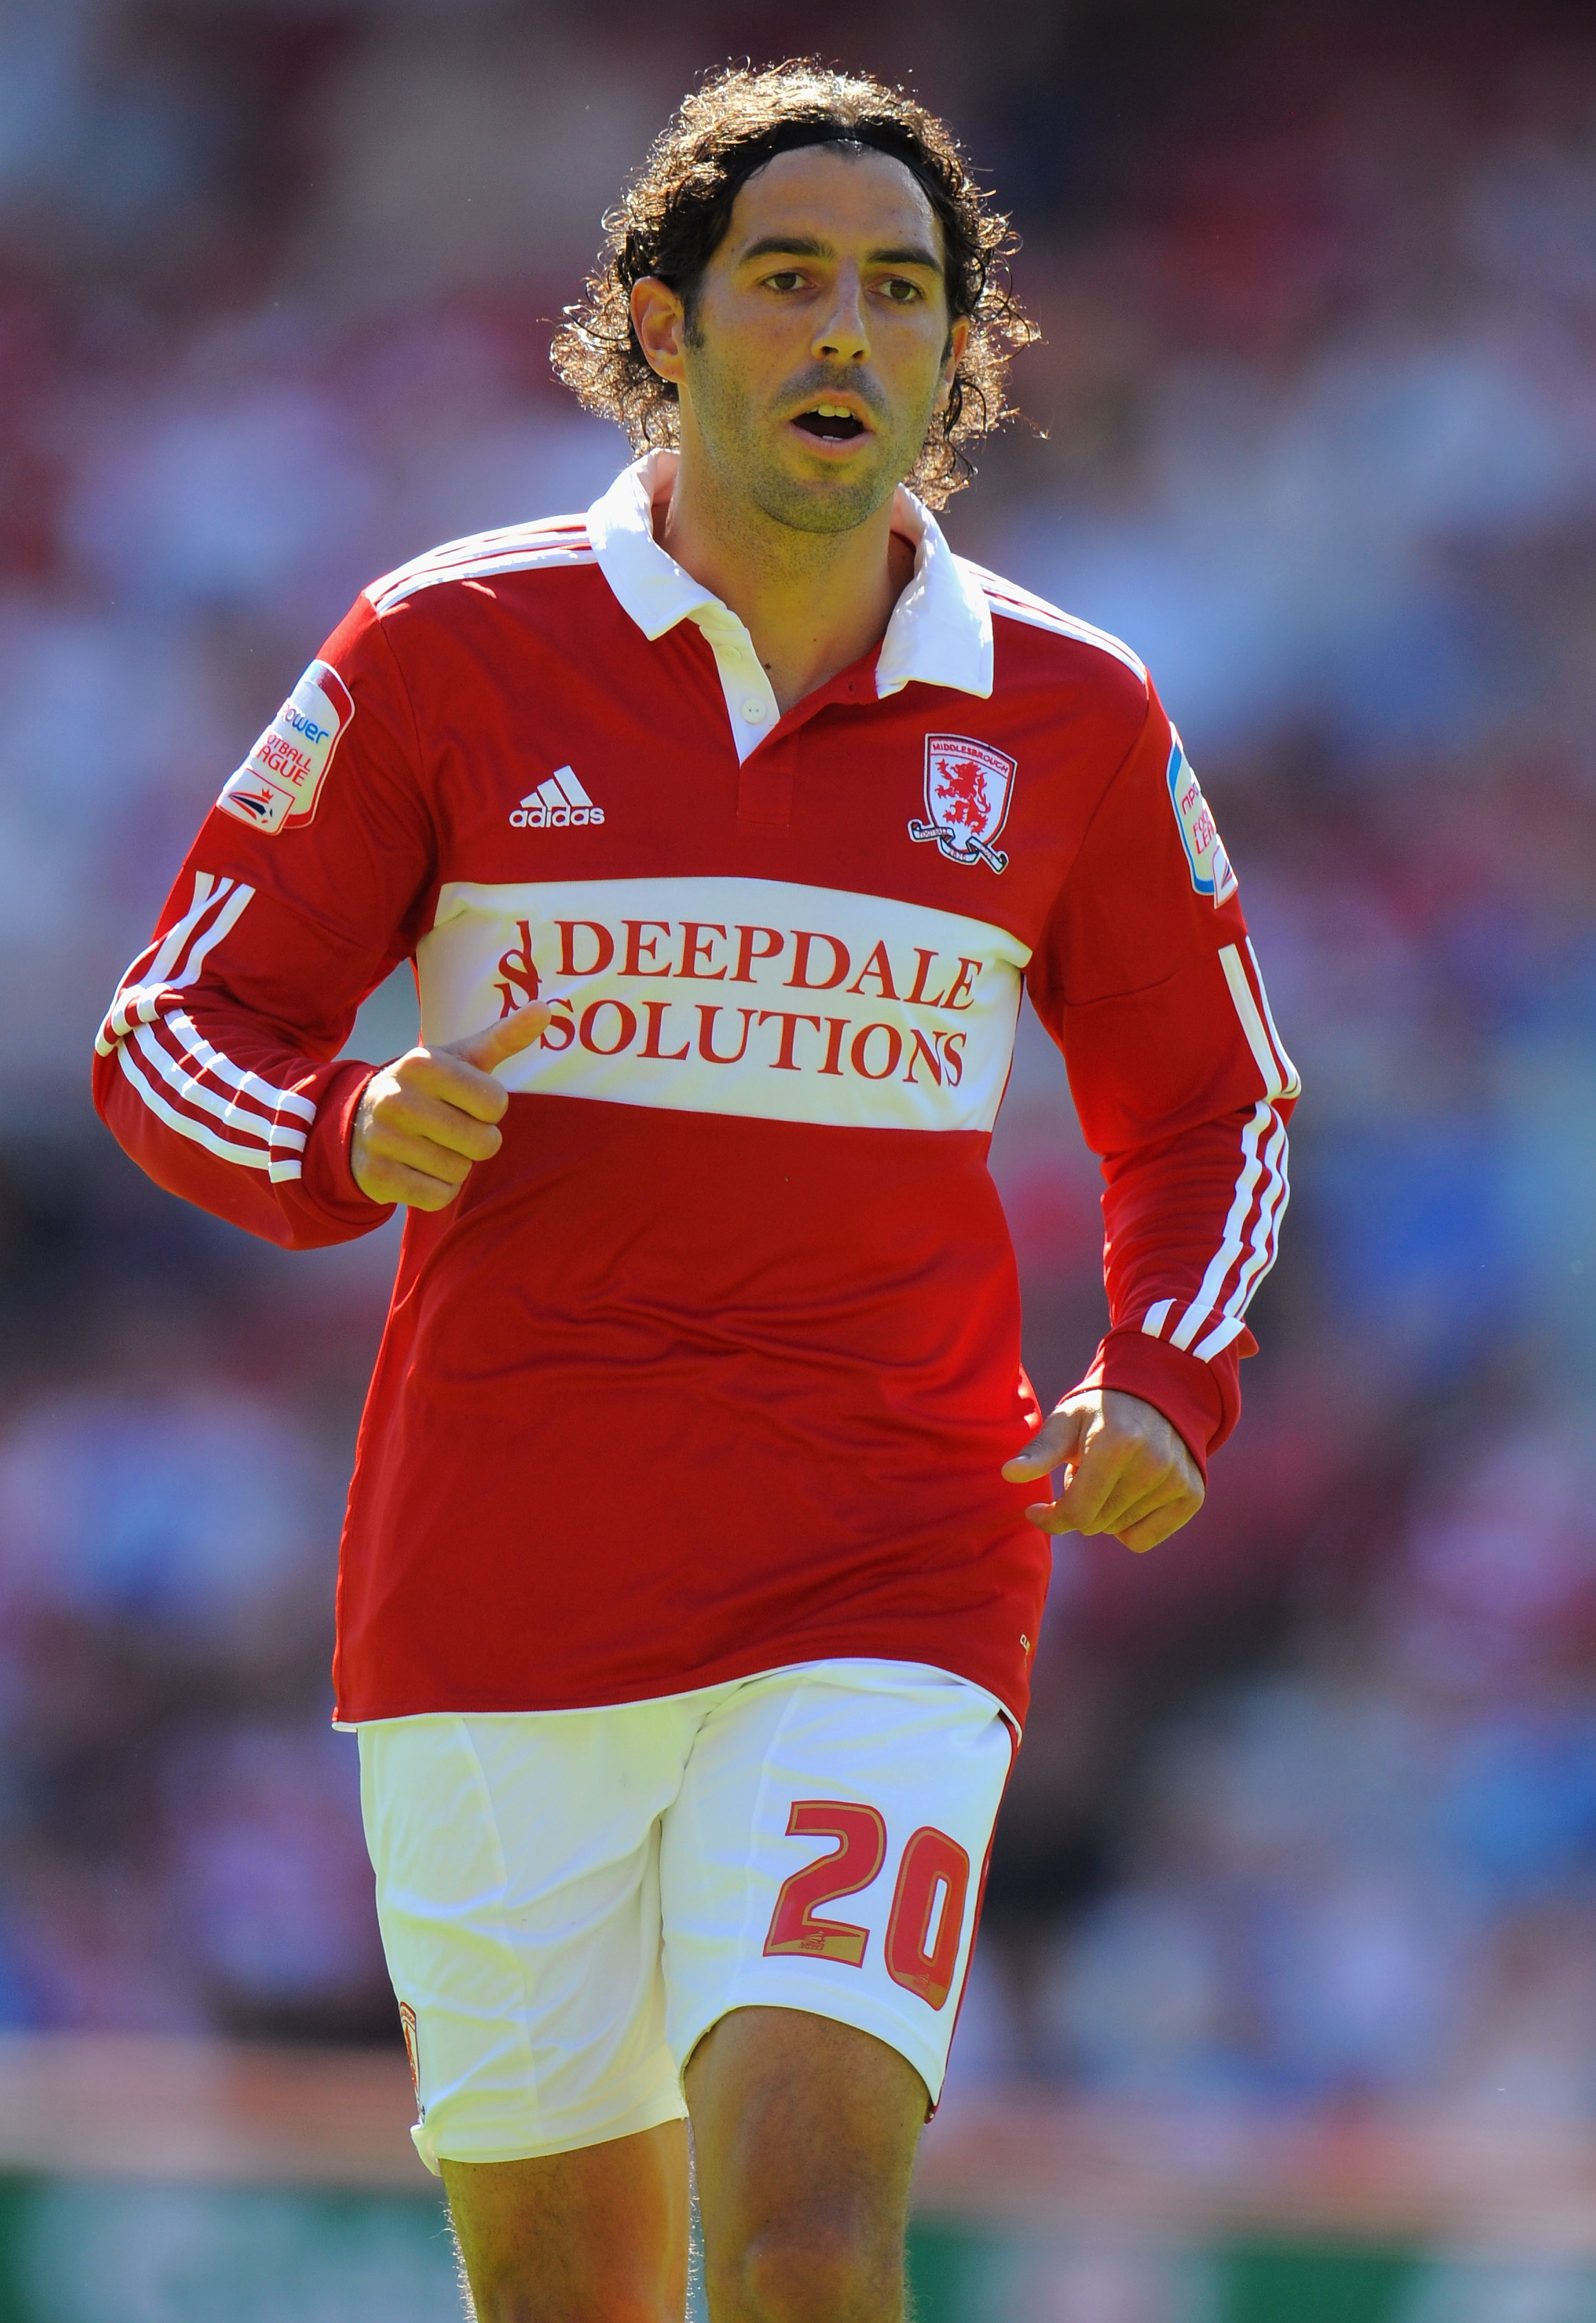 MIDDLESBROUGH, ENGLAND - AUGUST 22: Julio Arca of Middlesbrough looks on during the npower Championship match between Middlesbrough and Sheffield United at the Riverside Stadium on August 22, 2010 in Middlesbrough, England.  (Photo by Michael Regan/Getty 